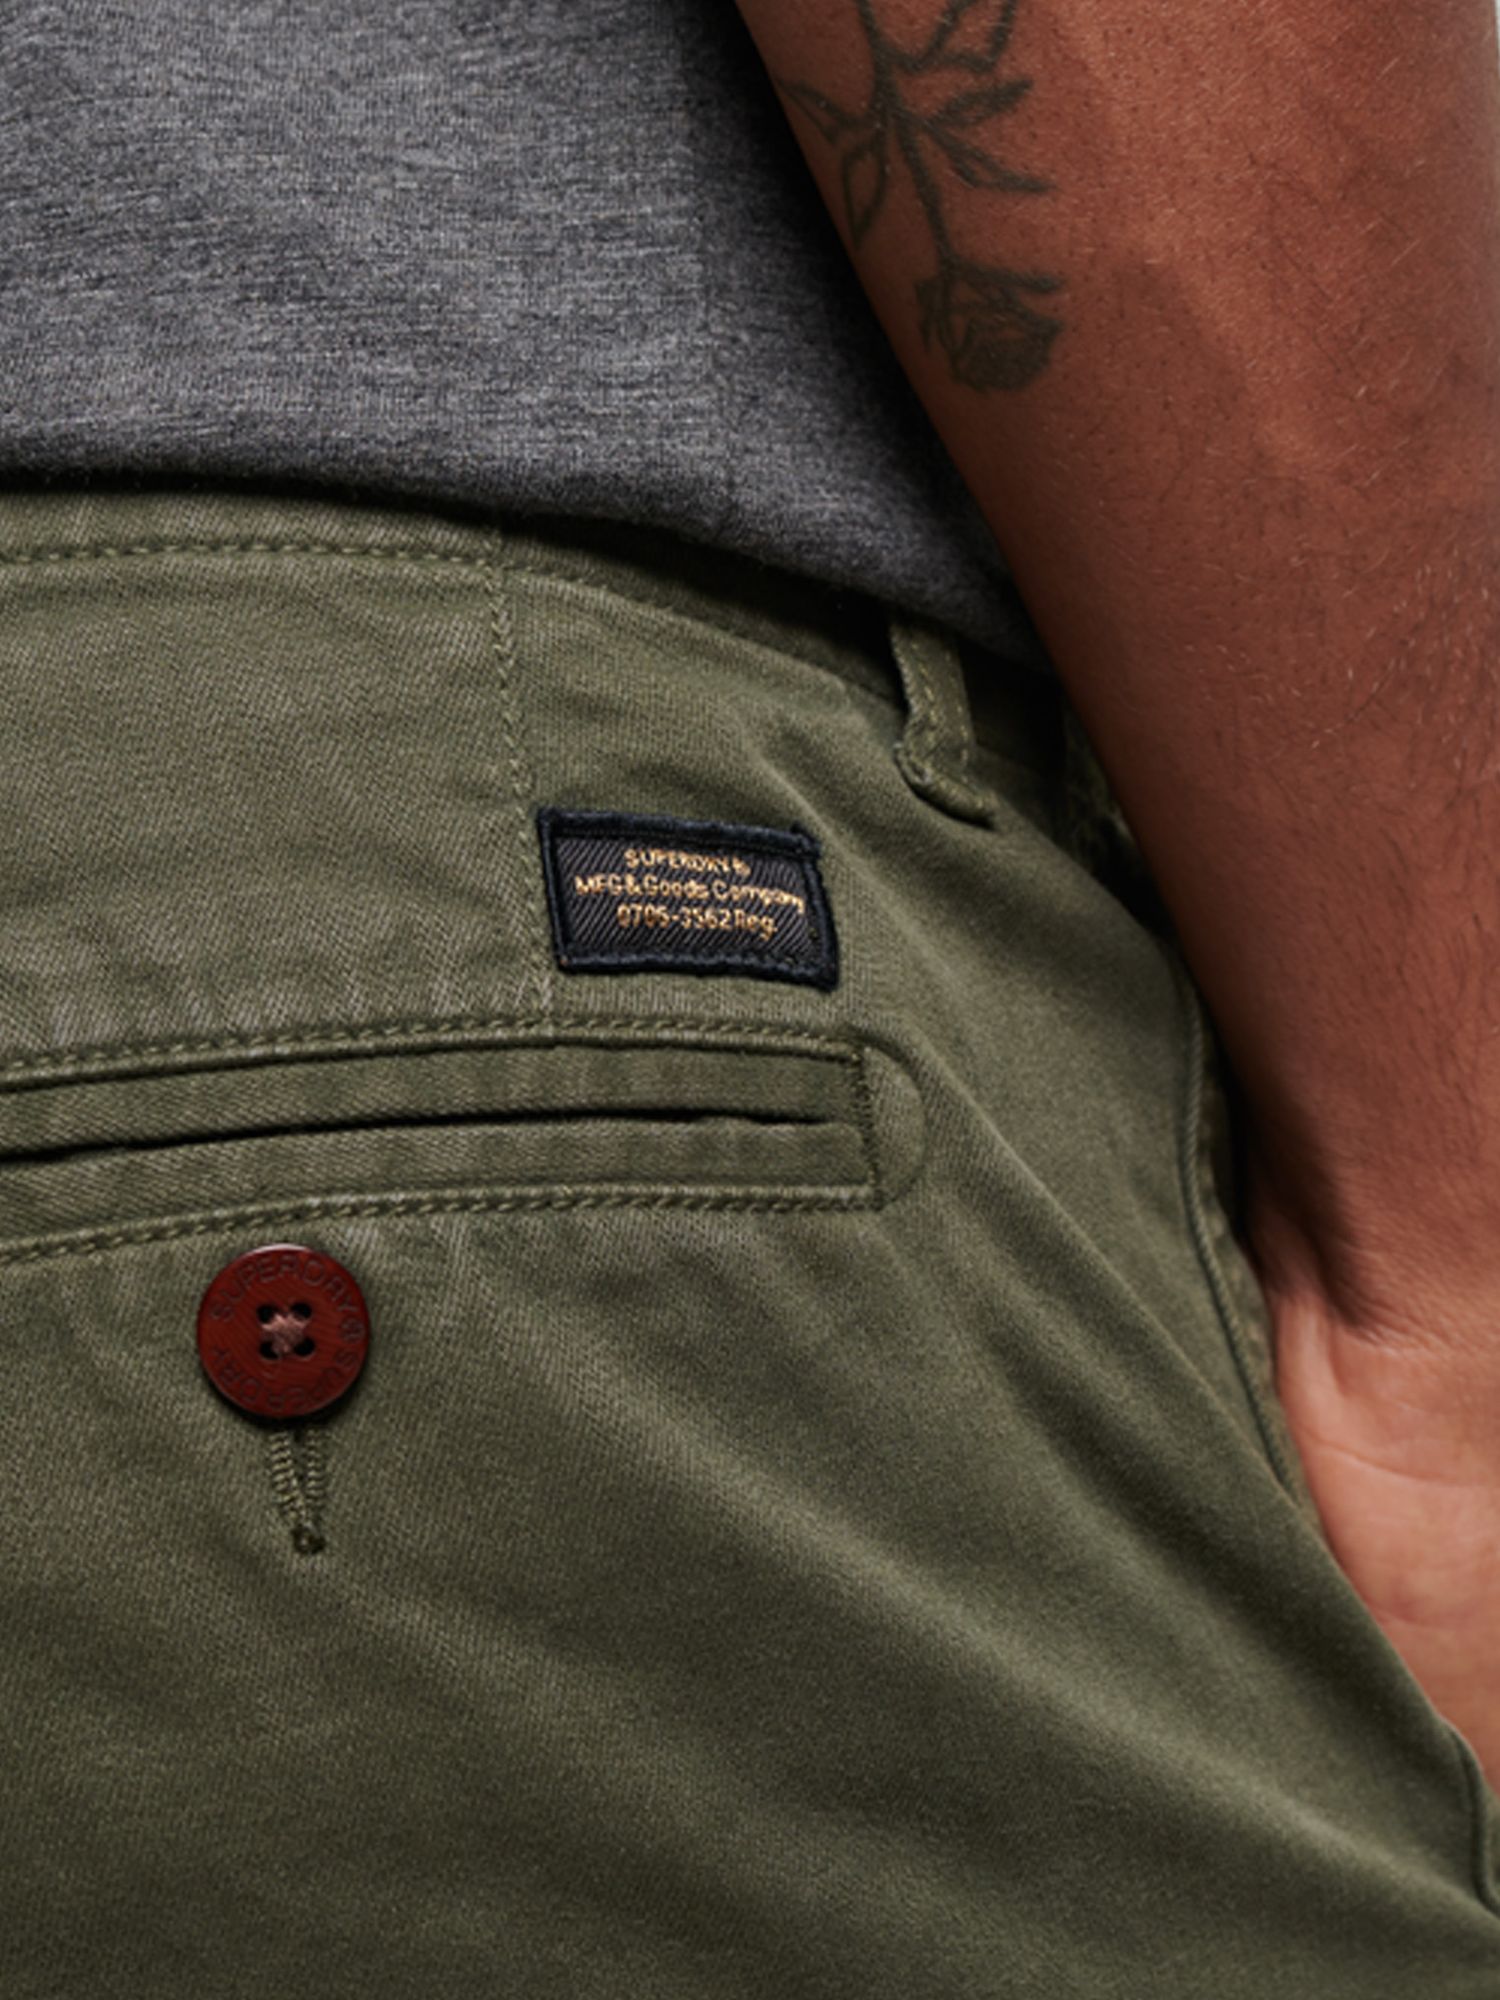 Superdry Officers Slim Chino Trousers, Surplus Goods Olive at John ...